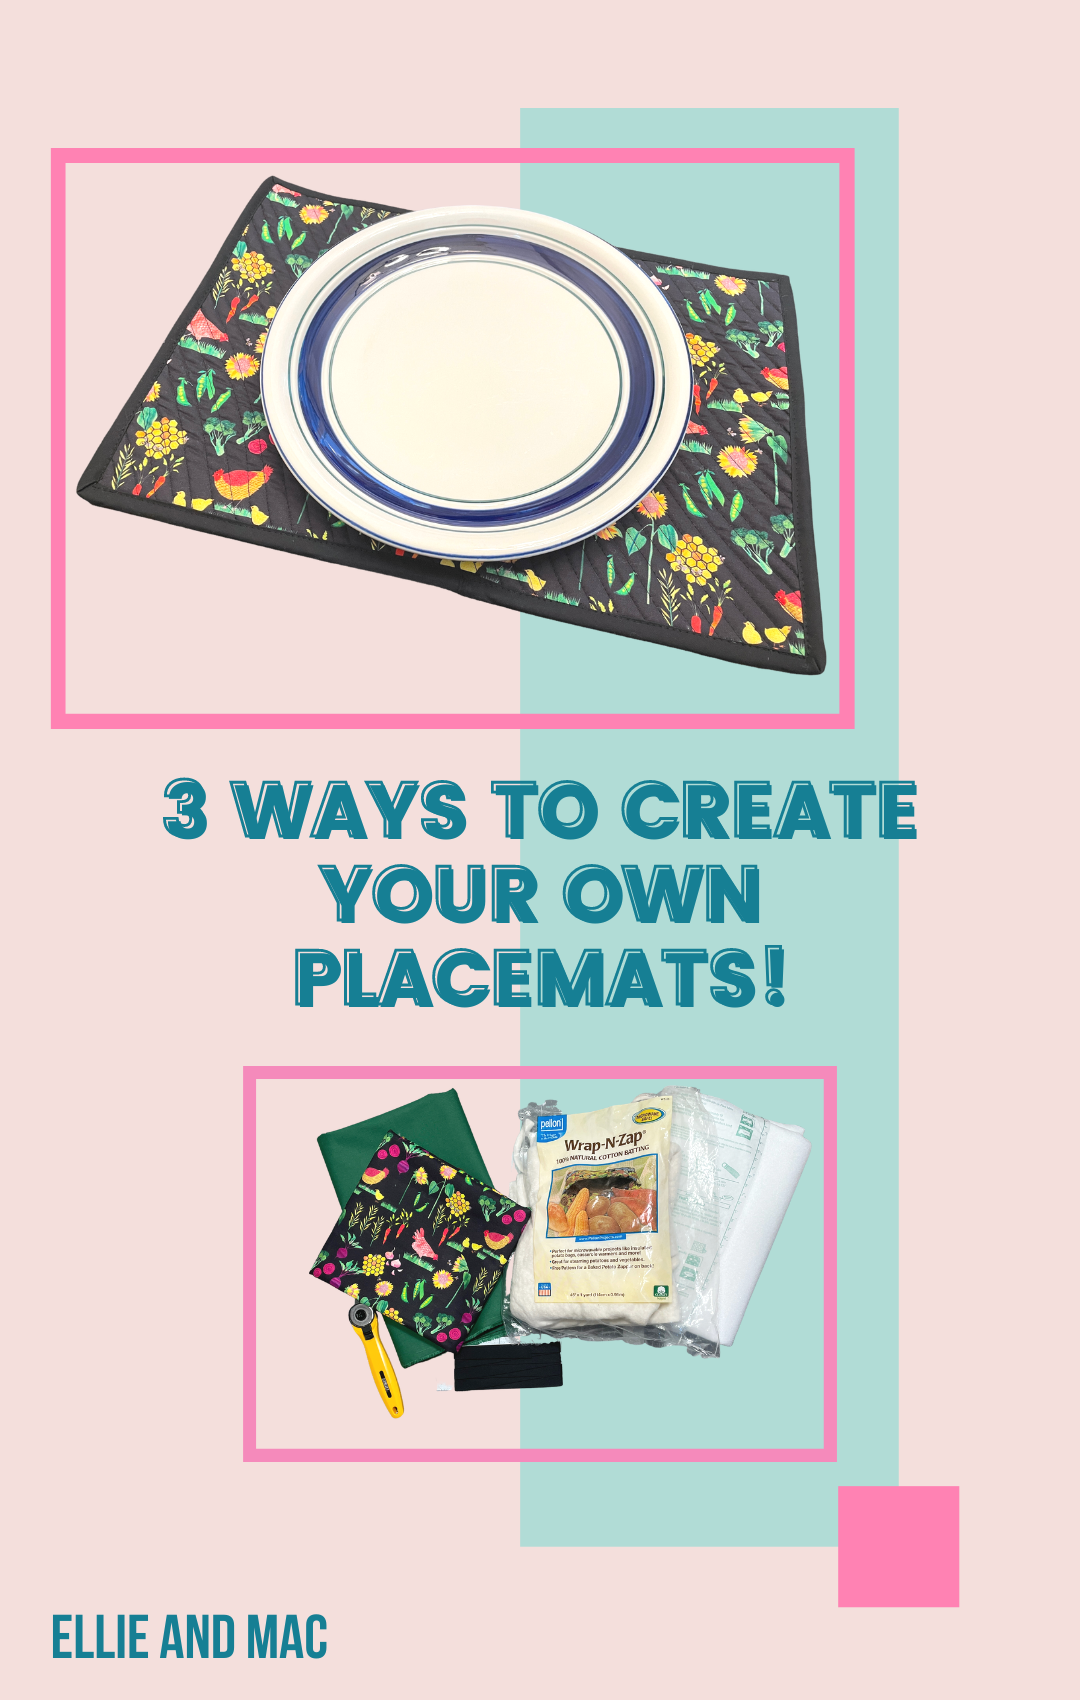 3 Ways to Create Your Own Placemats!